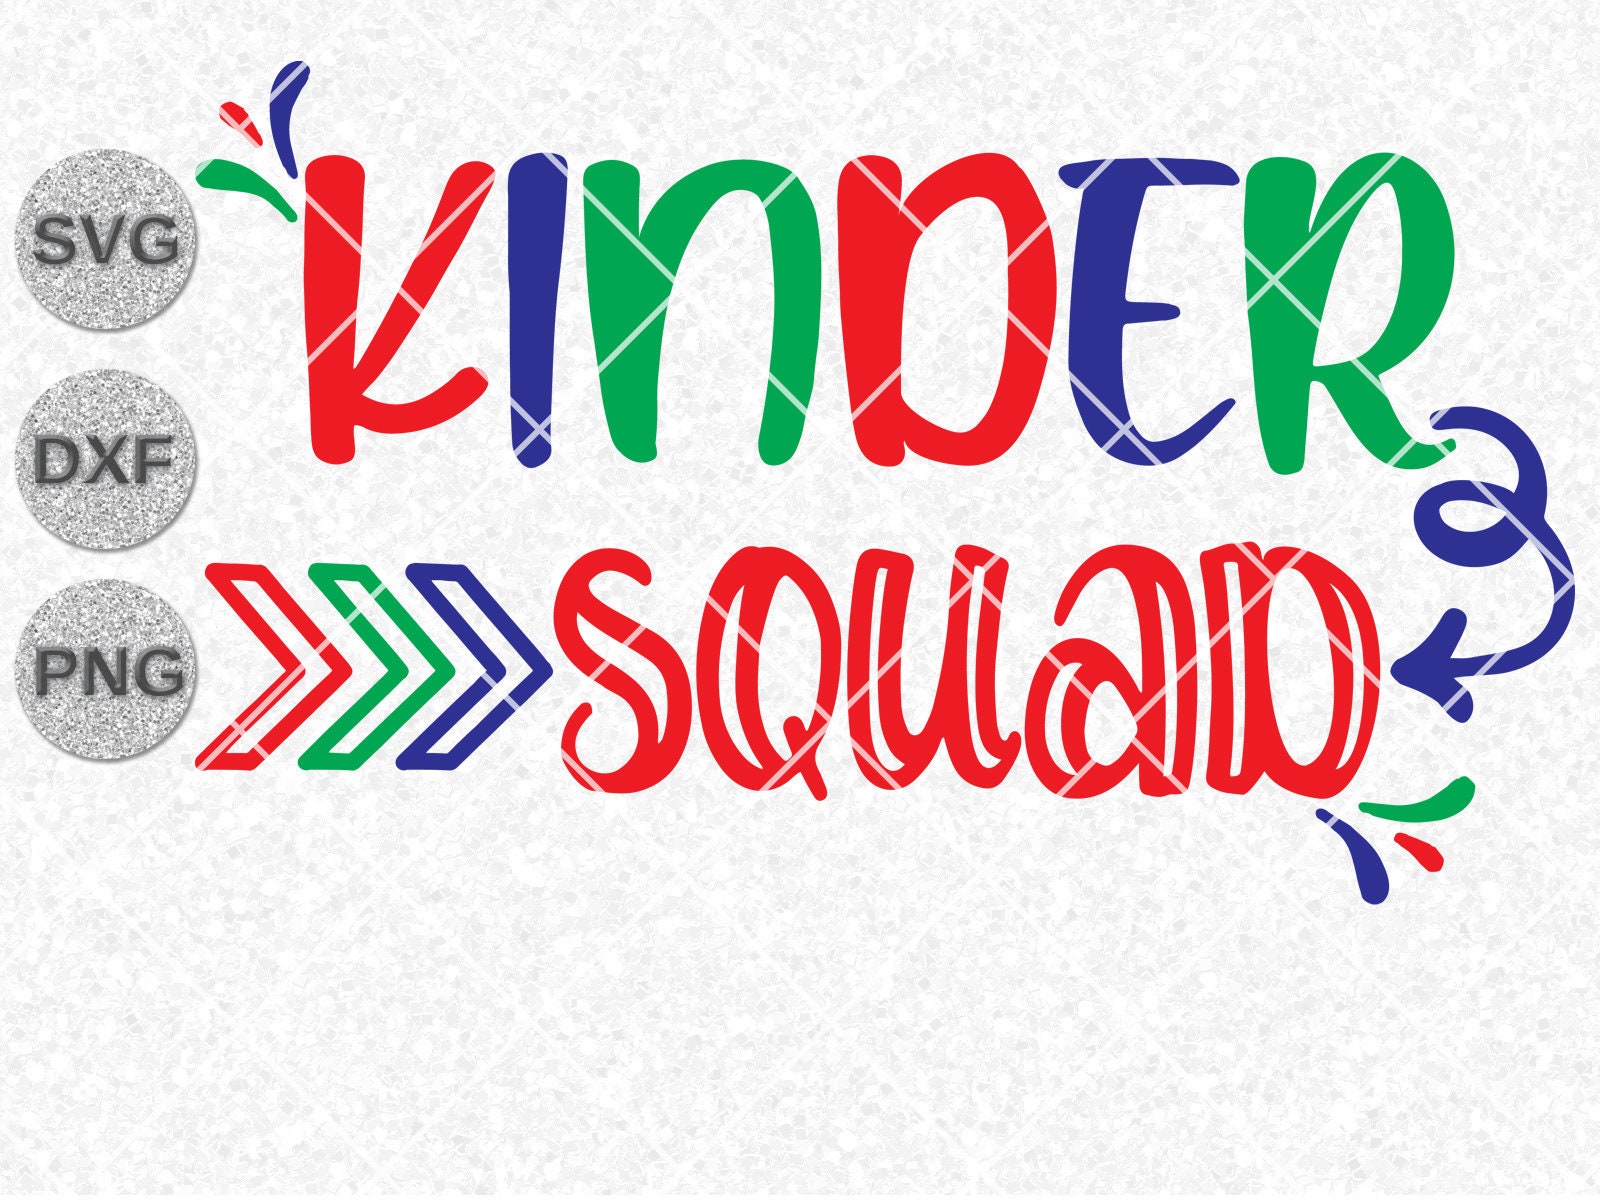 Kinder Squad Dxf Png Clipart Shirts Squad | Etsy